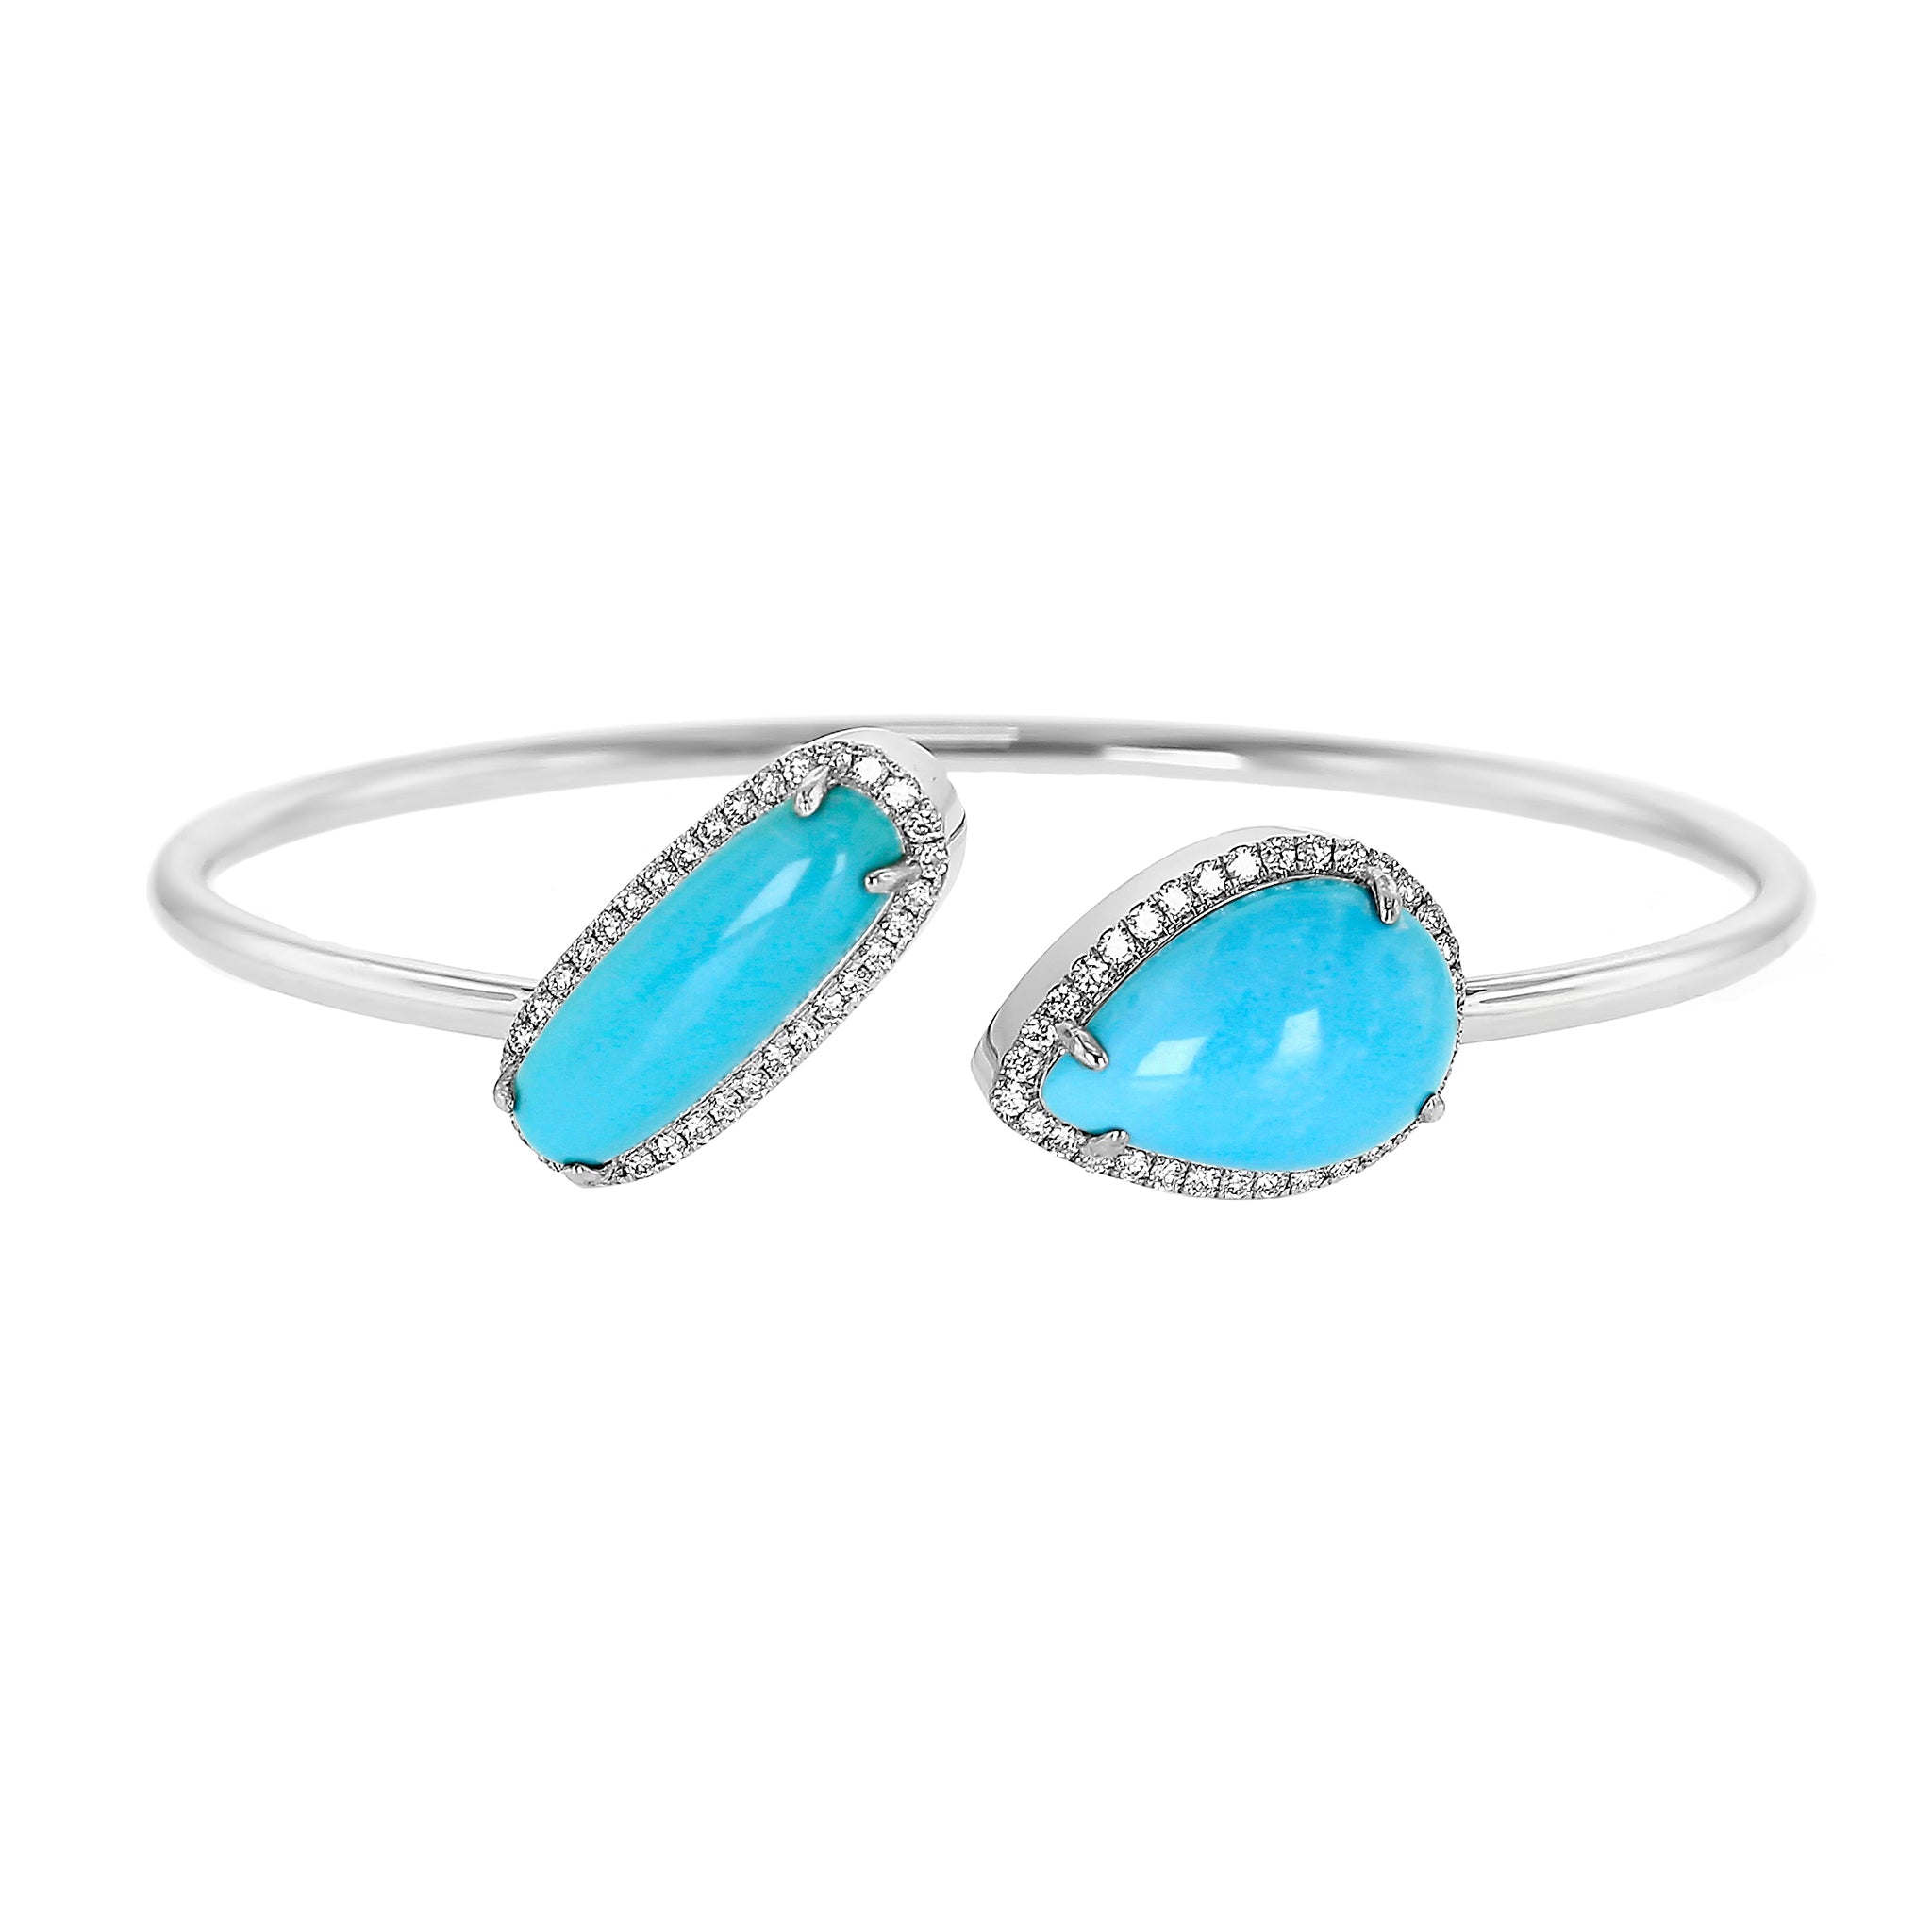 Yael Designs pear turquoise, oval turquoise, and diamond bracelet - Be On Park